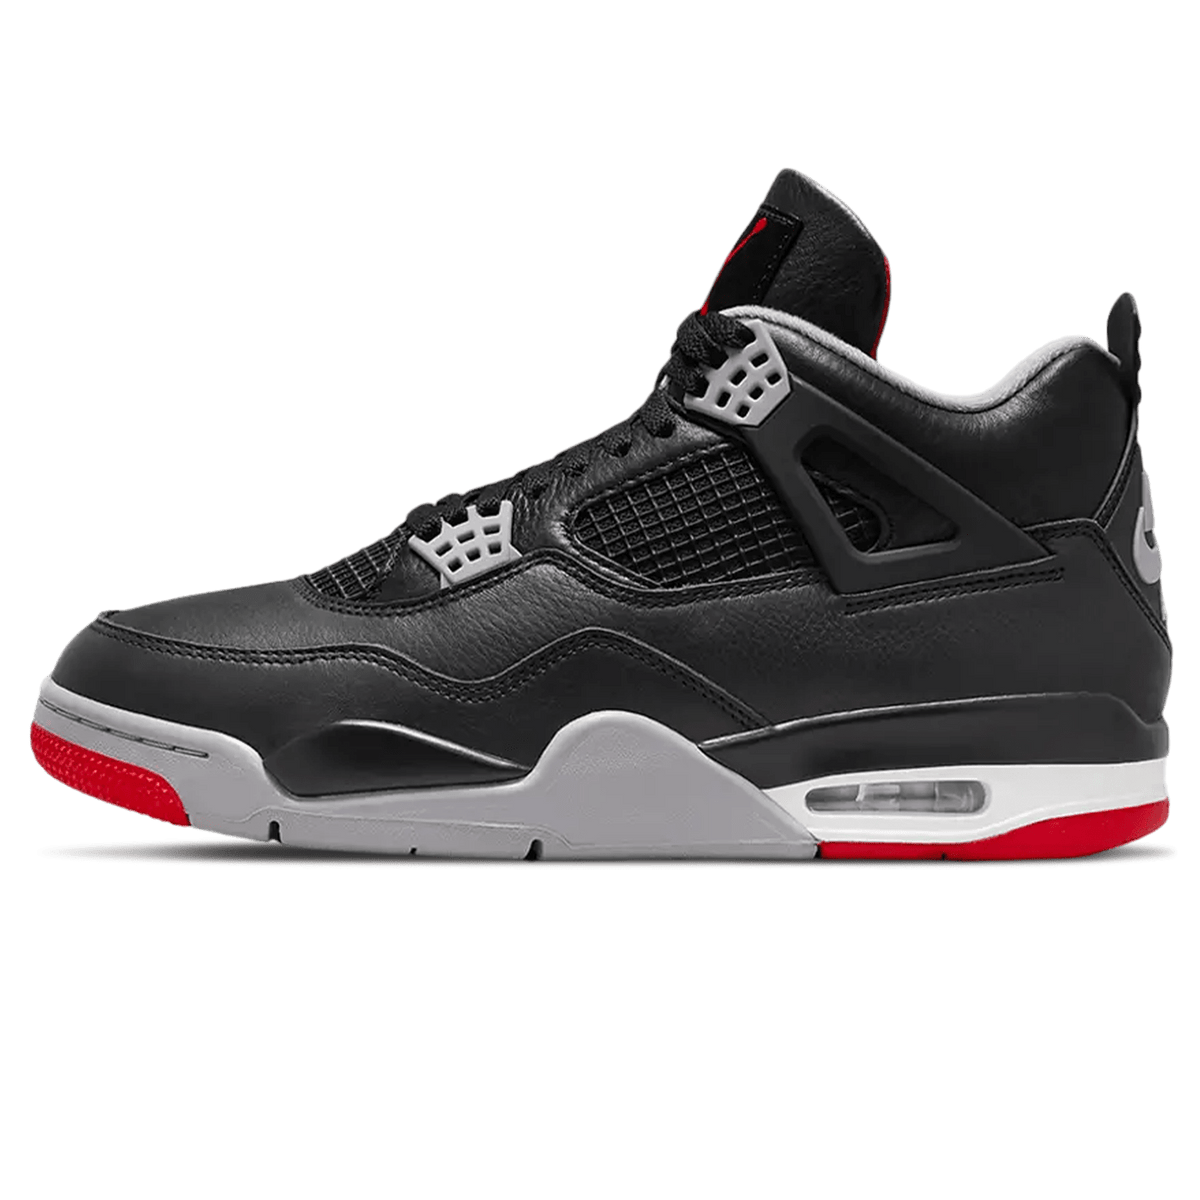 If you want to check out more Air jordan och PEs that are beyond unobtanium Retro 'Bred Reimagined' - UrlfreezeShops